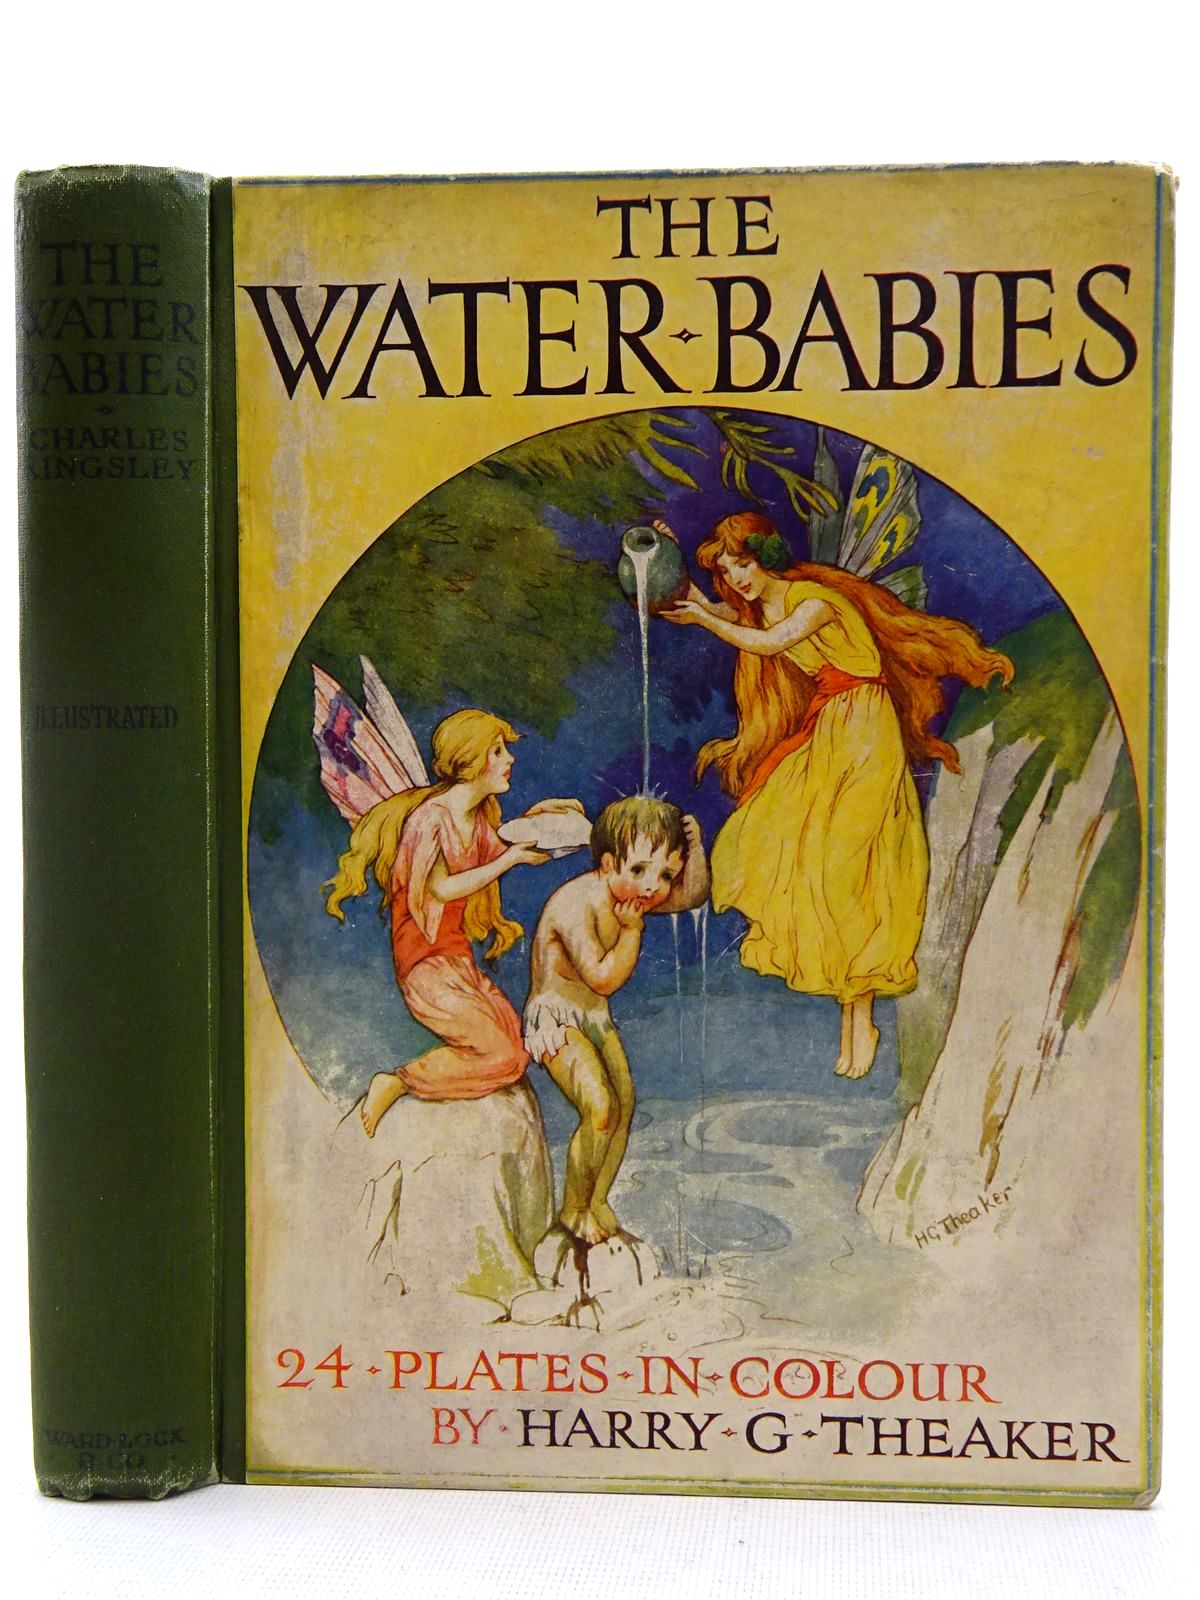 Photo of THE WATER BABIES written by Kingsley, Charles illustrated by Theaker, Harry G. published by Ward, Lock & Co. Ltd. (STOCK CODE: 2128506)  for sale by Stella & Rose's Books